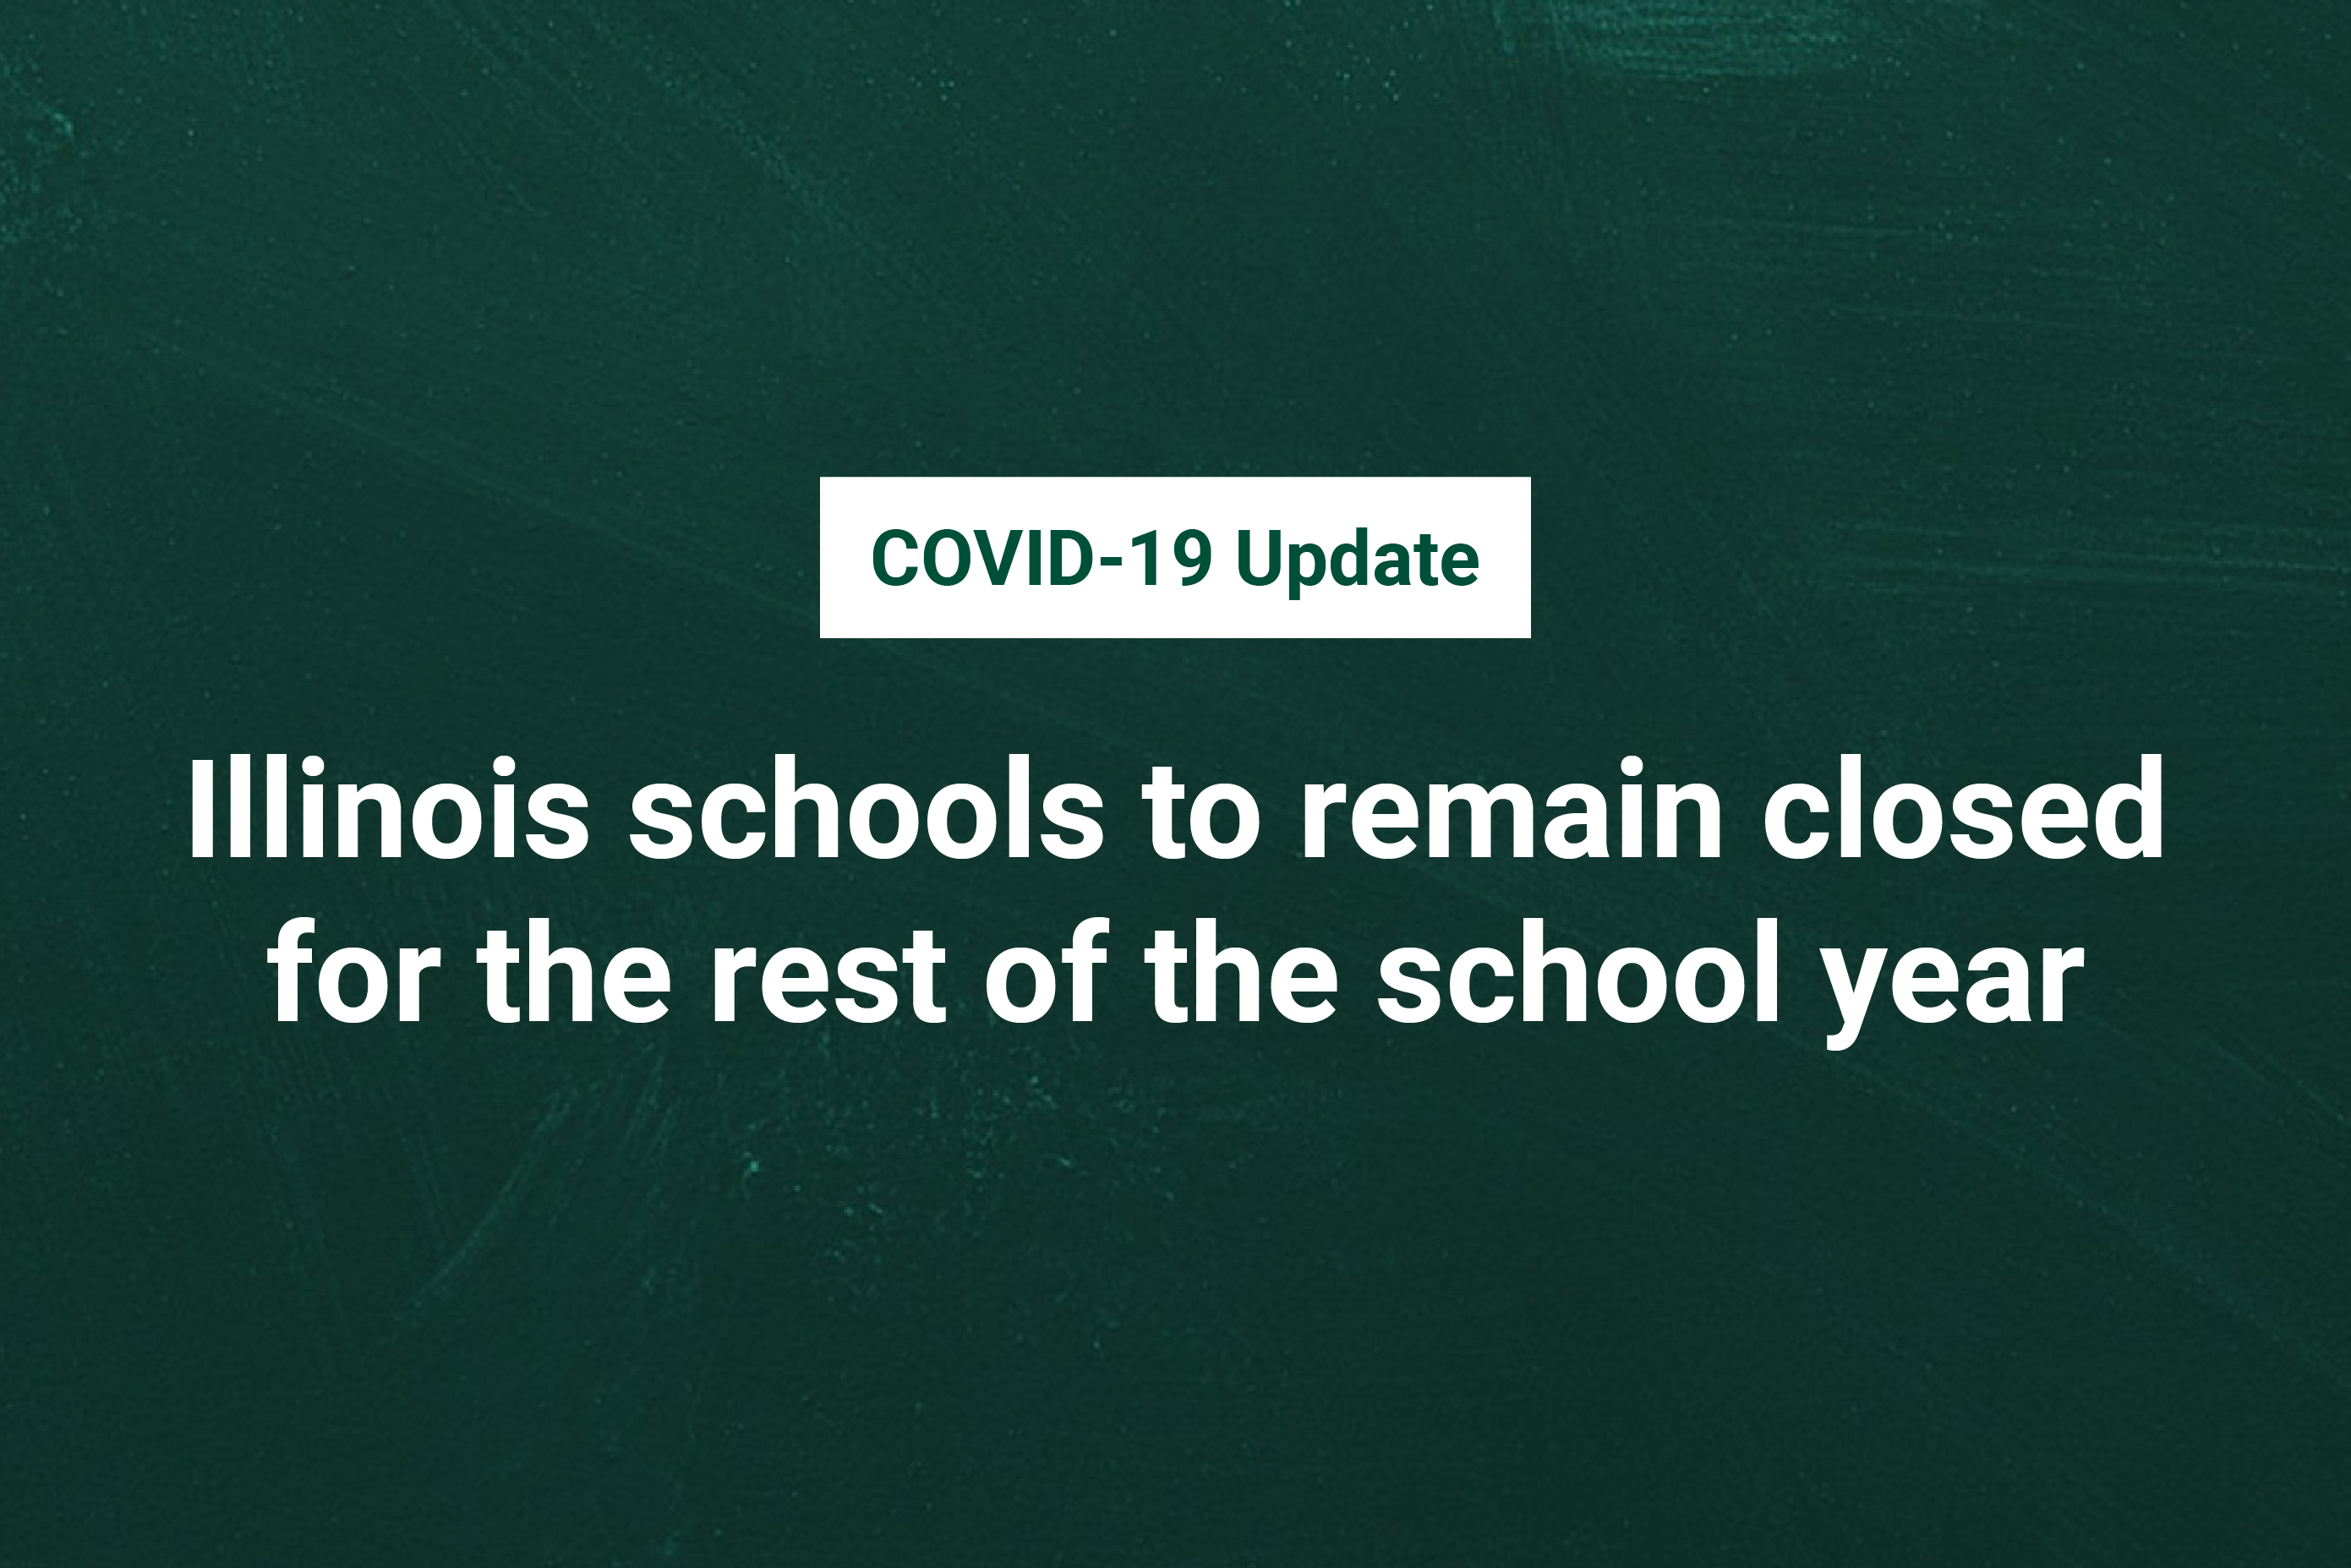 Illinois schools to remain closed for the rest of the school year